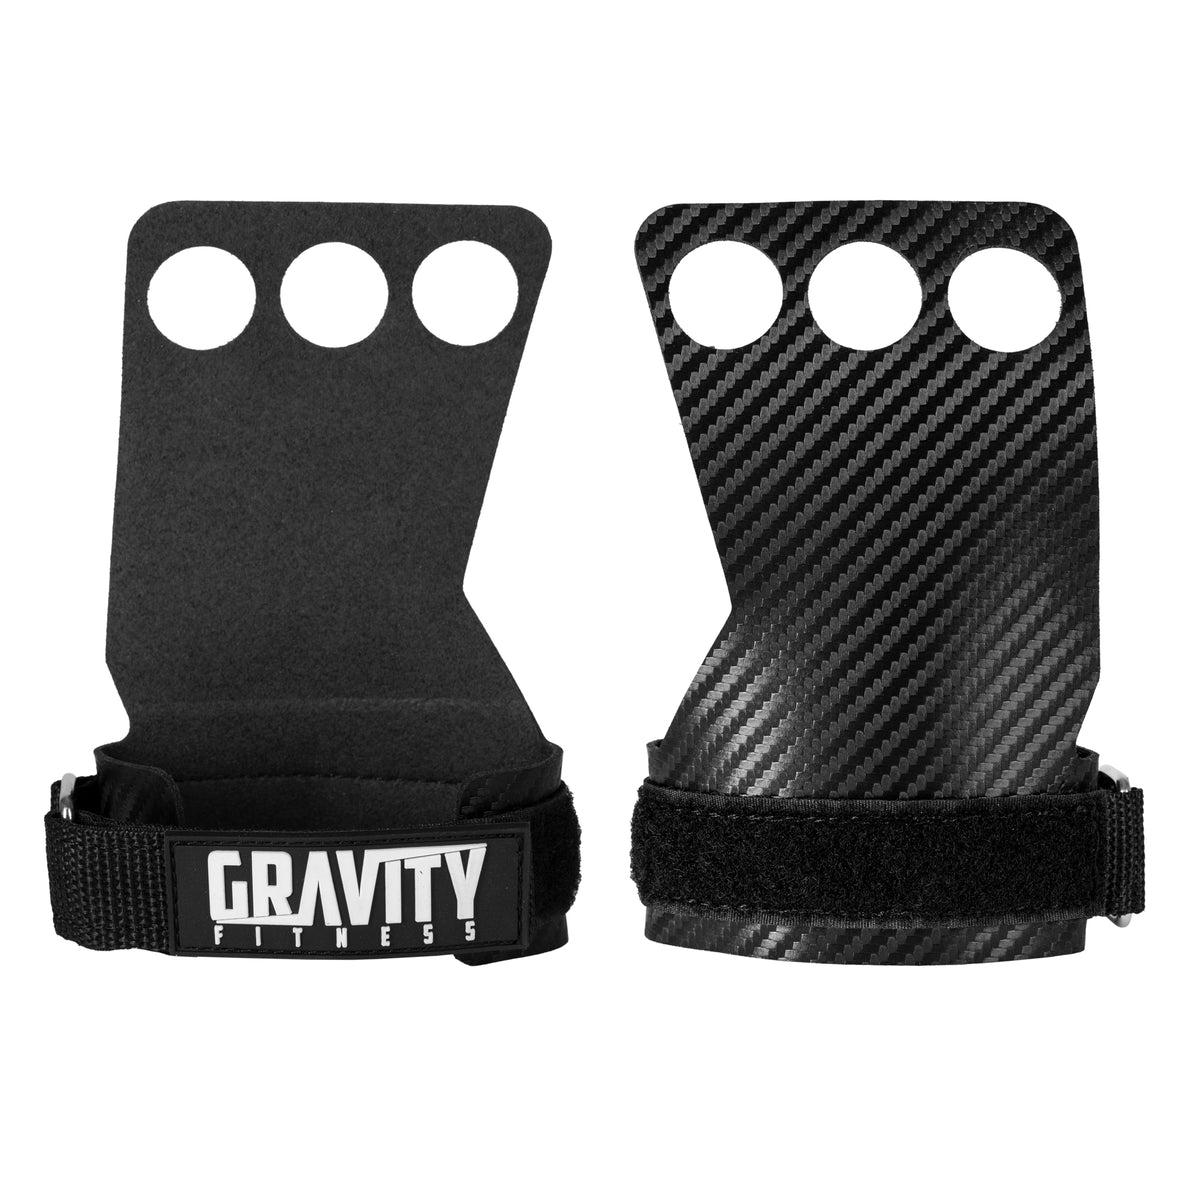 Gravity Fitness Gymnast Grips &amp; Hand Protectors